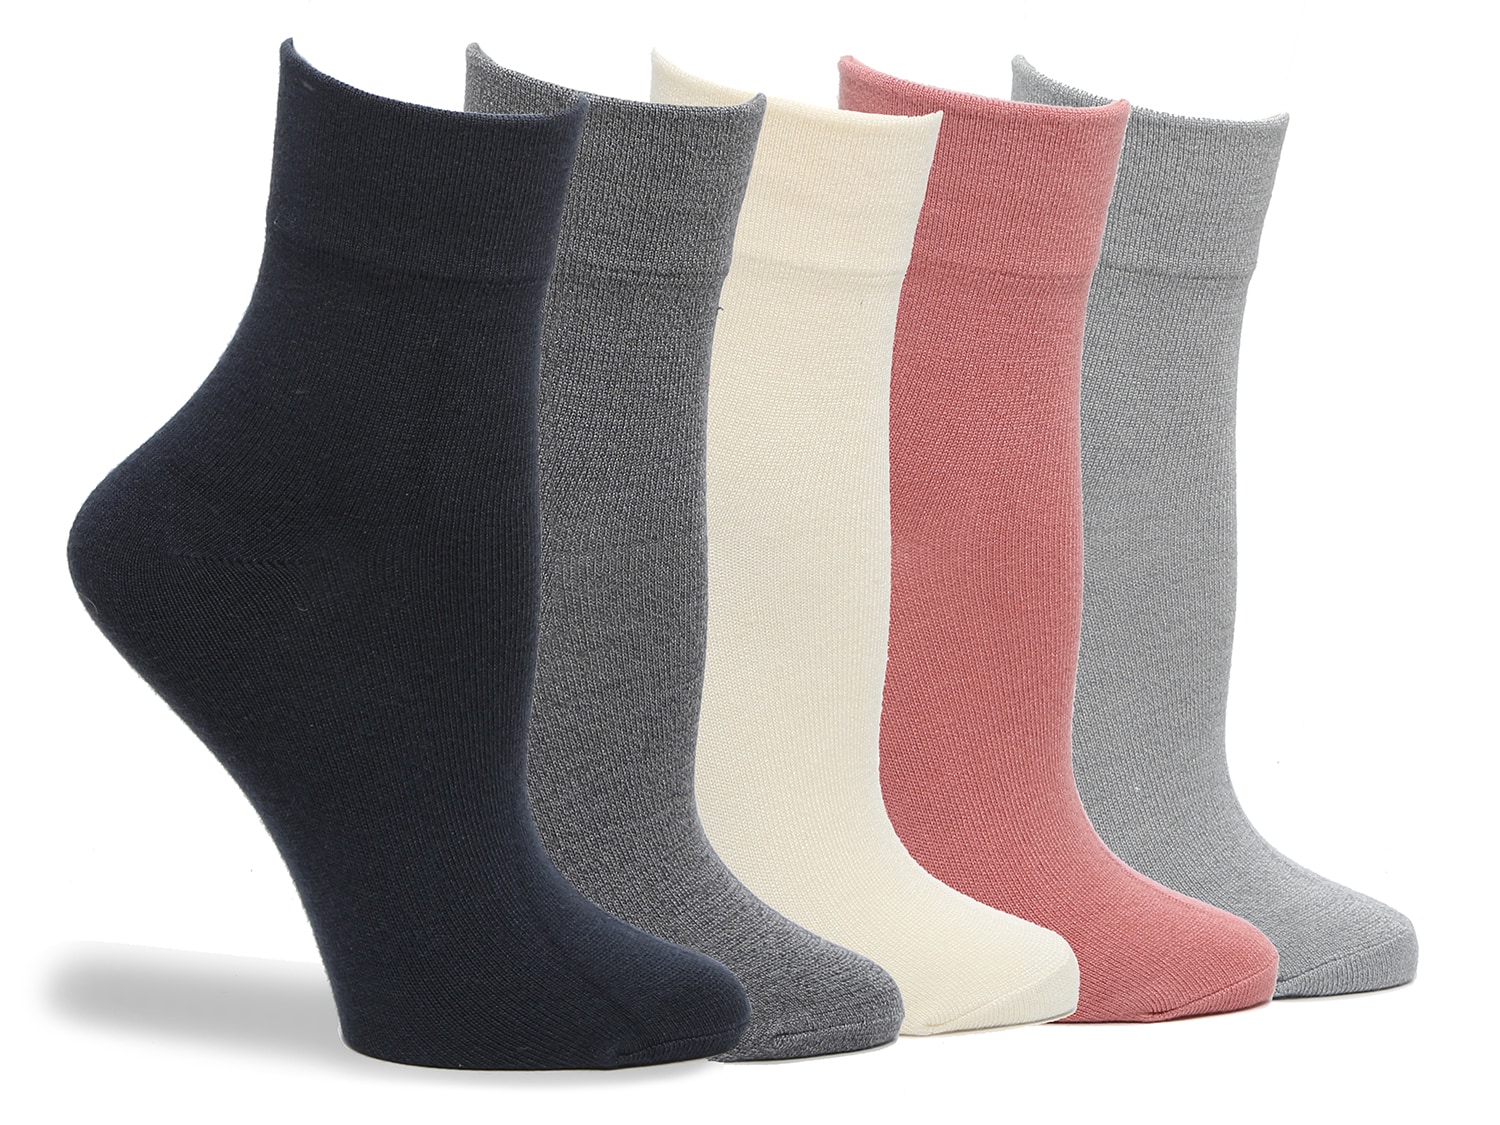 Crown Vintage Solid Women's Ankle Socks - 5 Pack - Free Shipping | DSW